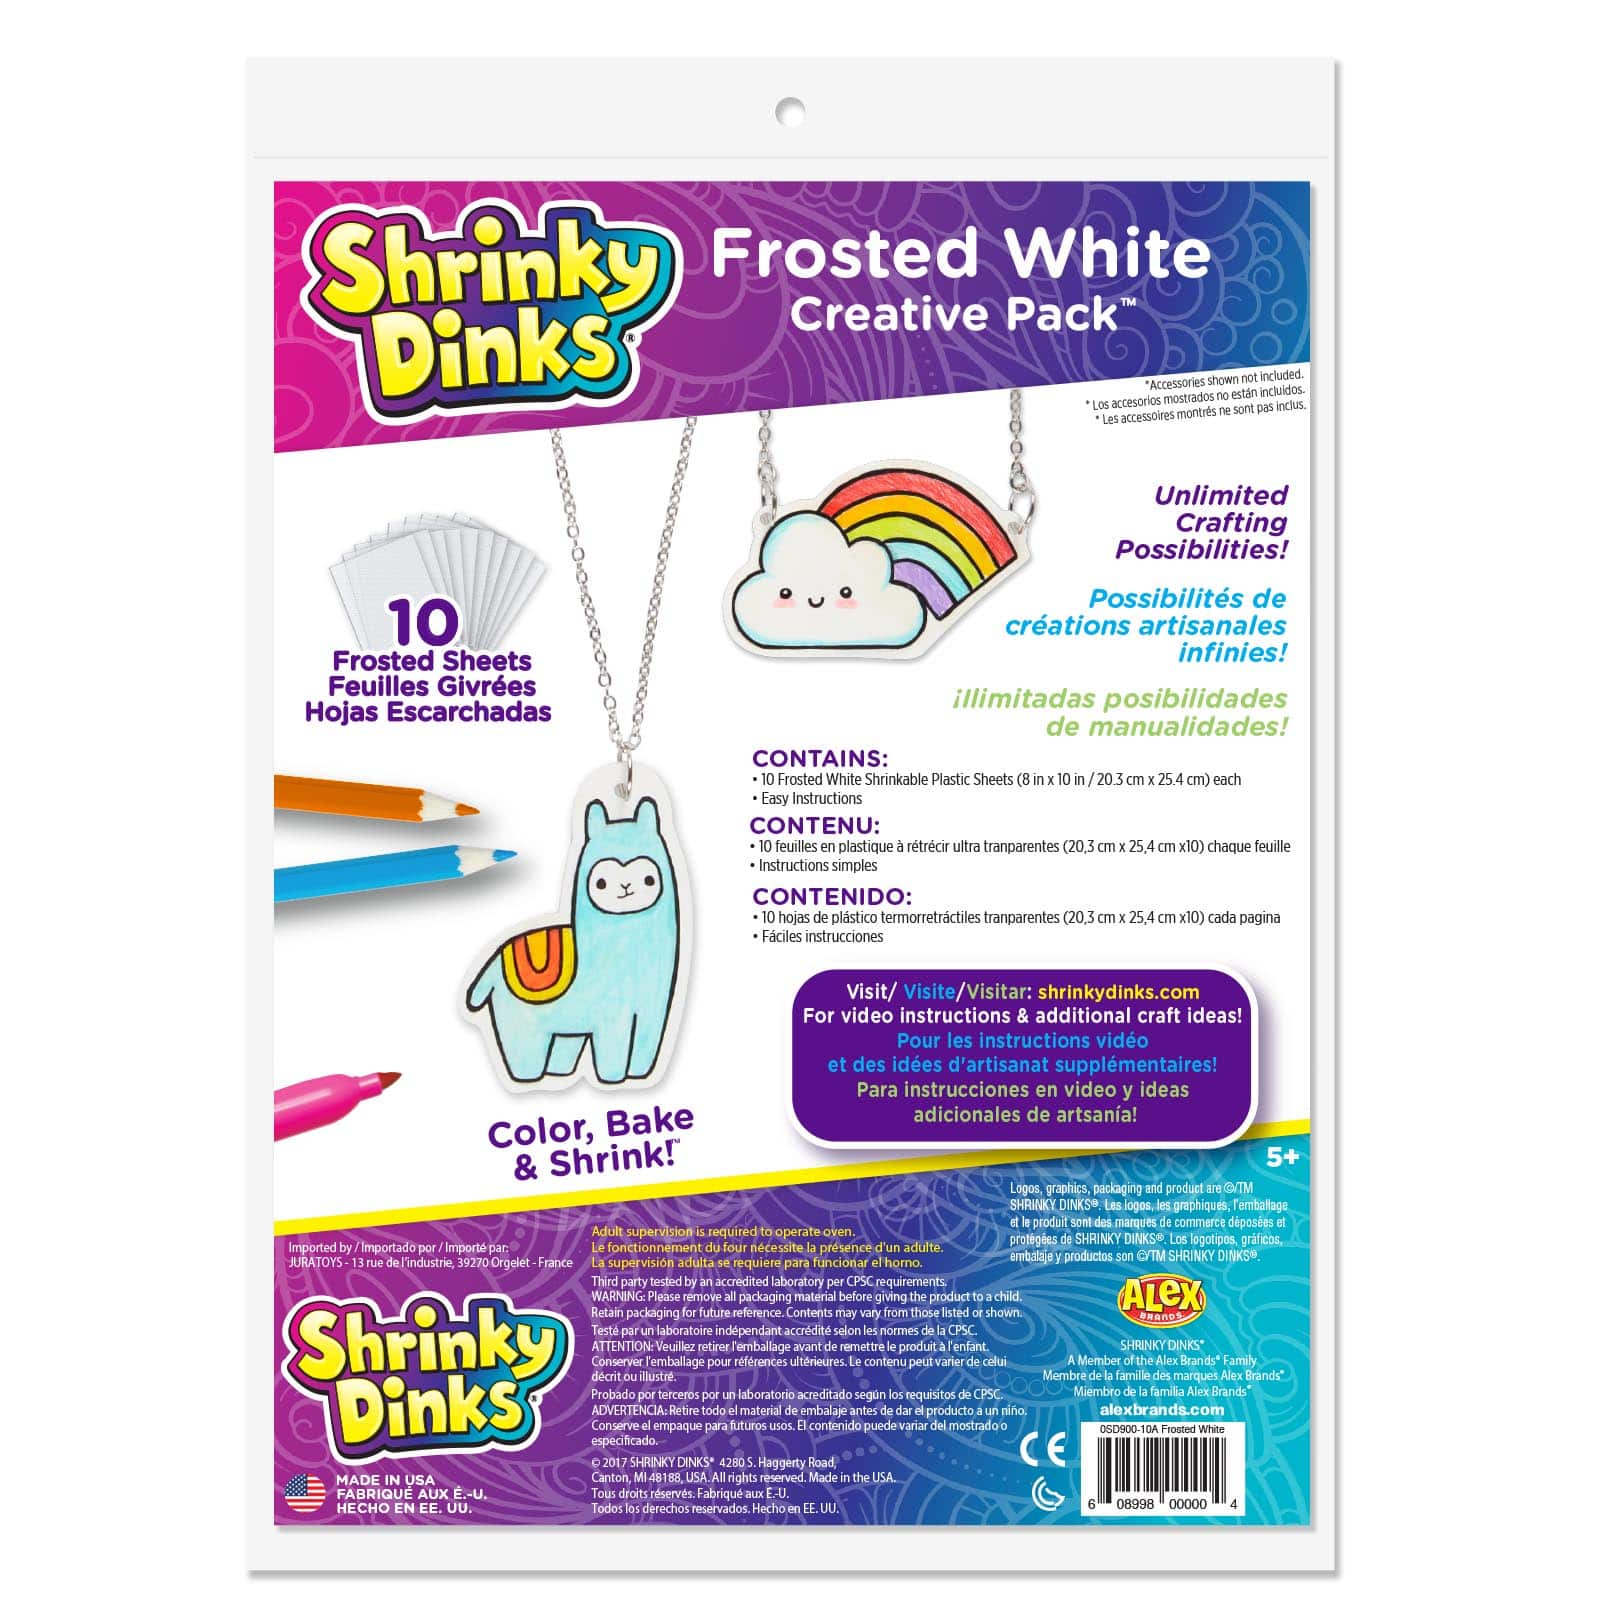 Shrinky Dinks Creative Pack 10 Sheets Frosted White